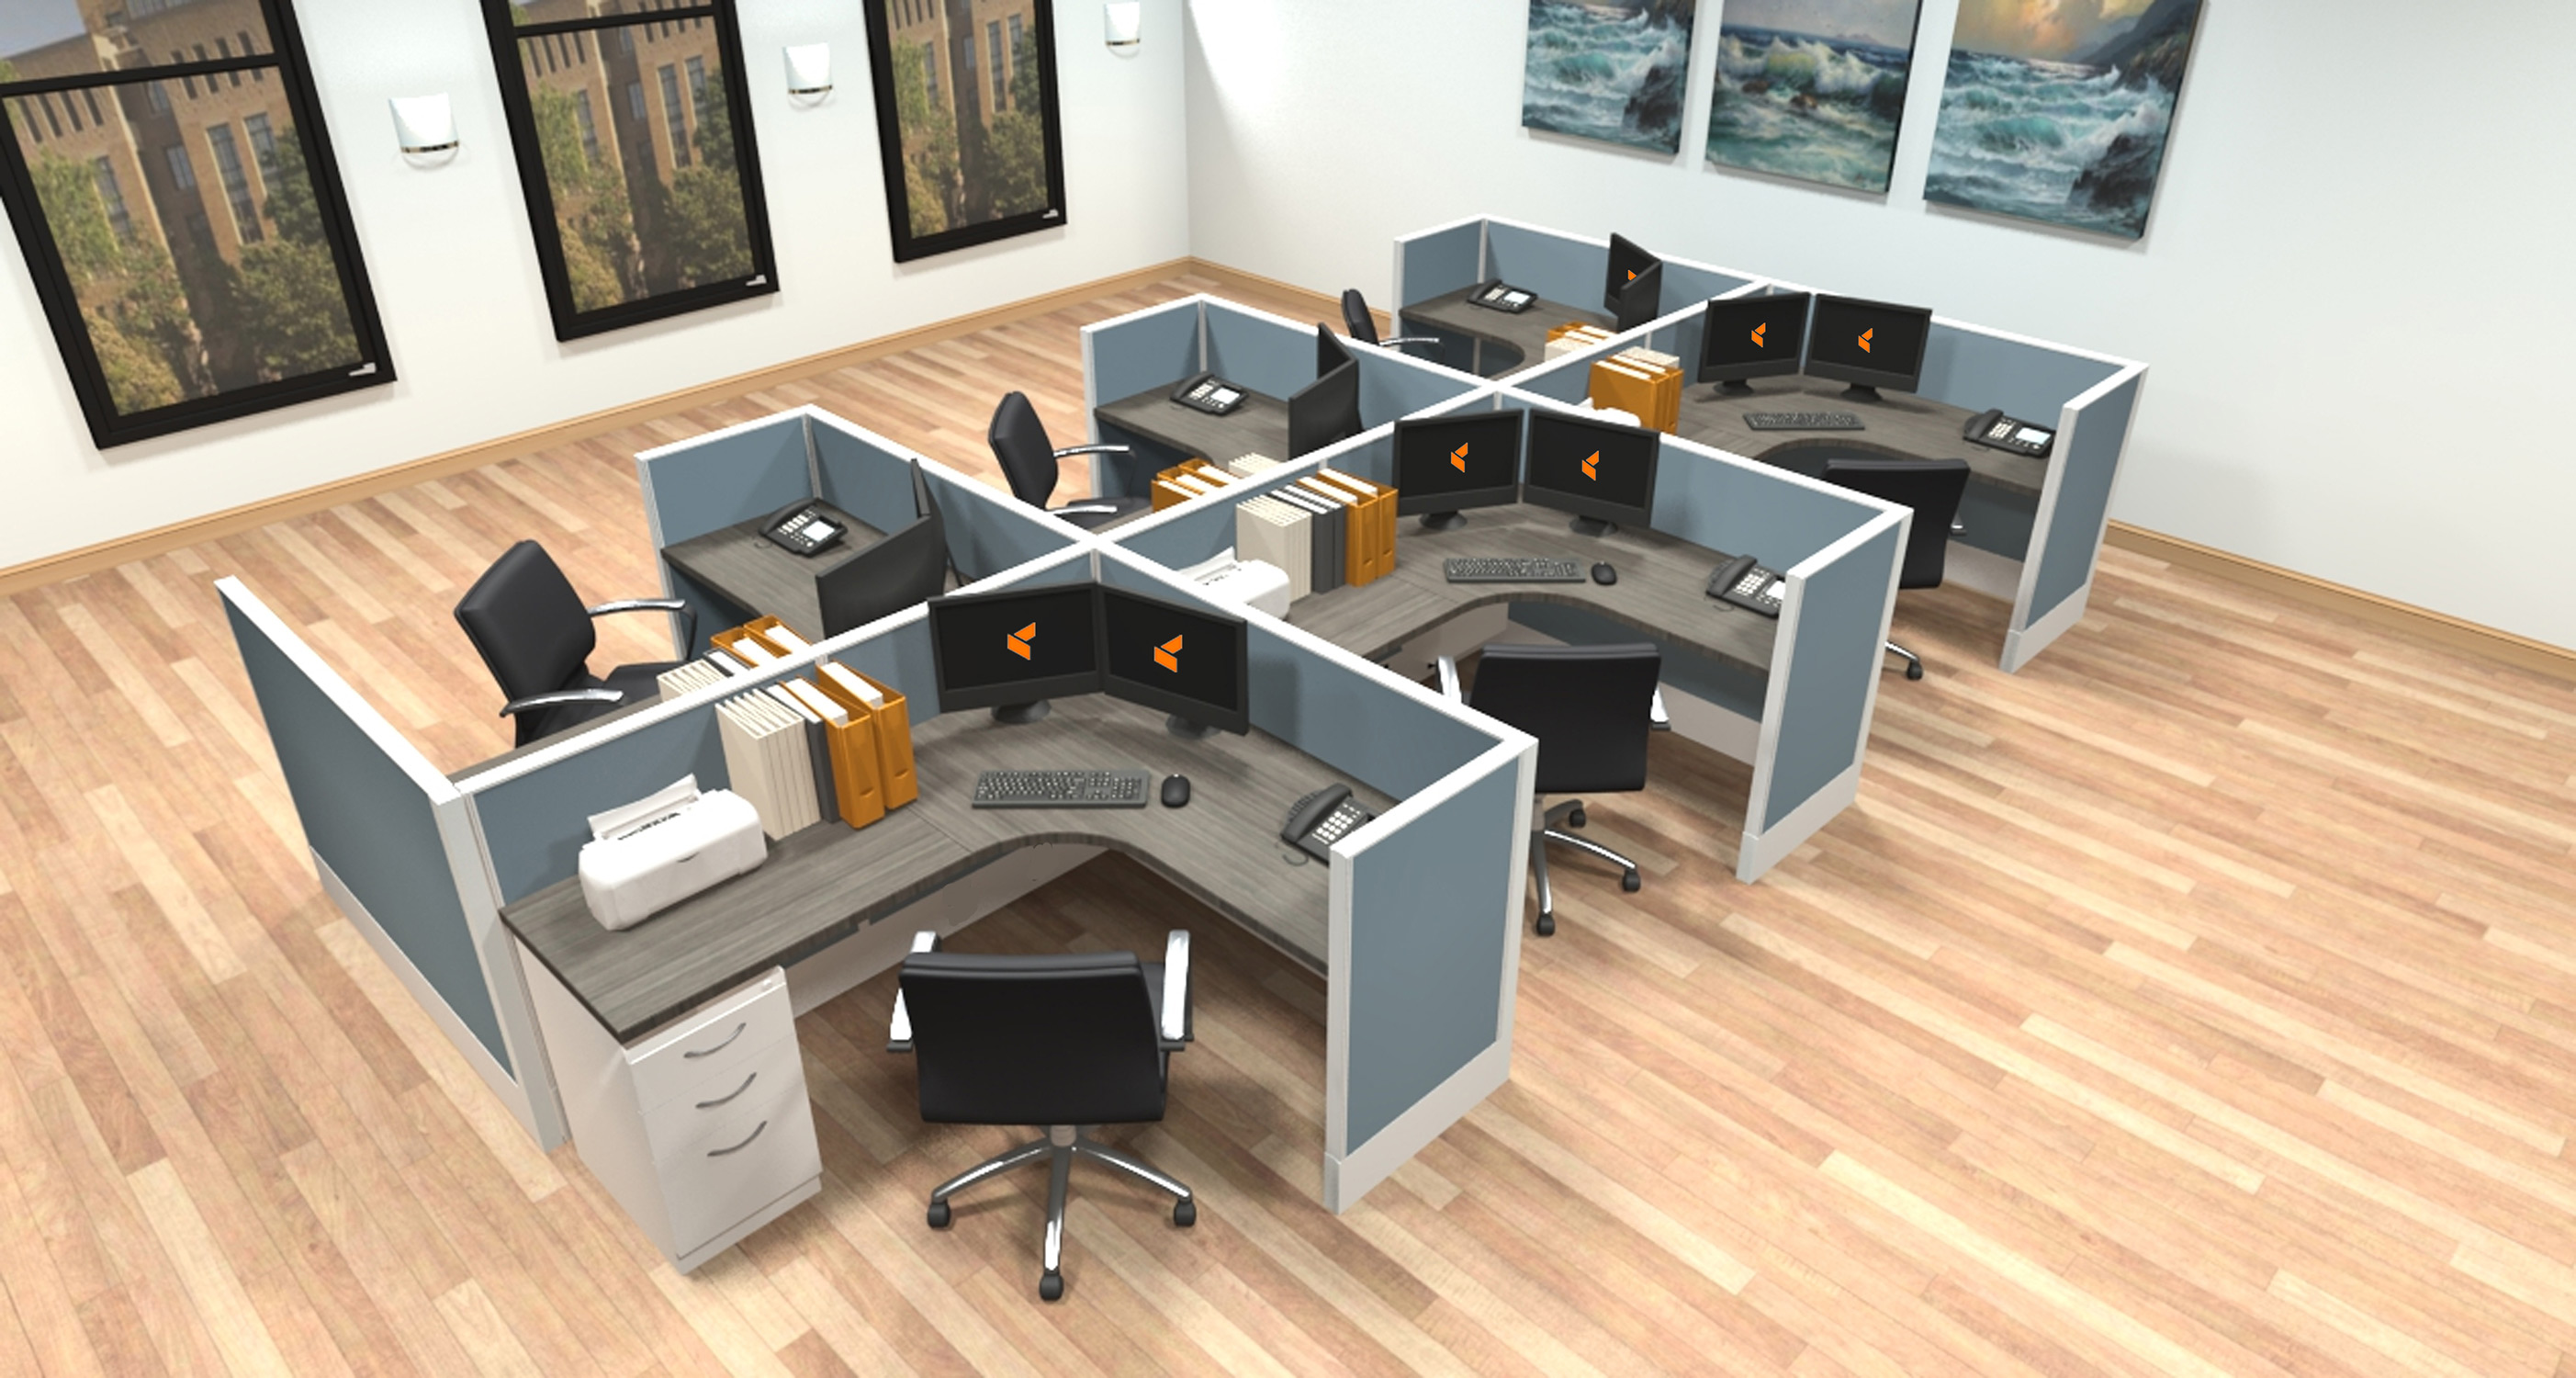 5x6 modular workstations from AIS - 6 Pack Cluster